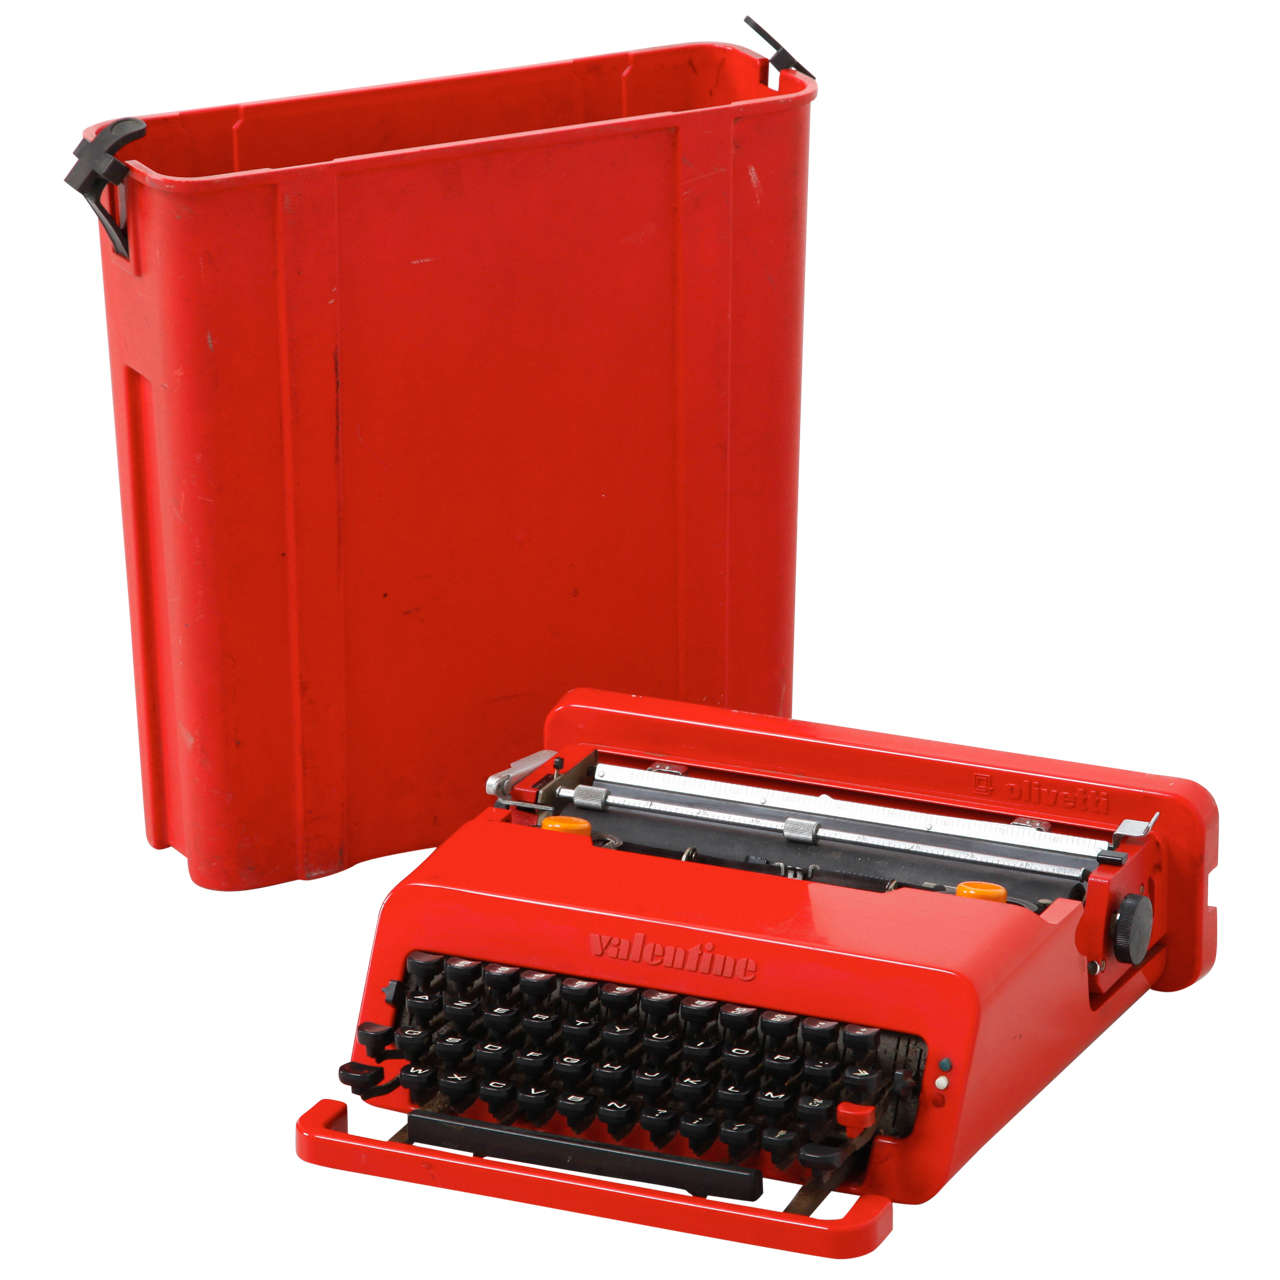 Olivetti Valentine Typewriter Designed By Ettore Sottsass & Perry King.